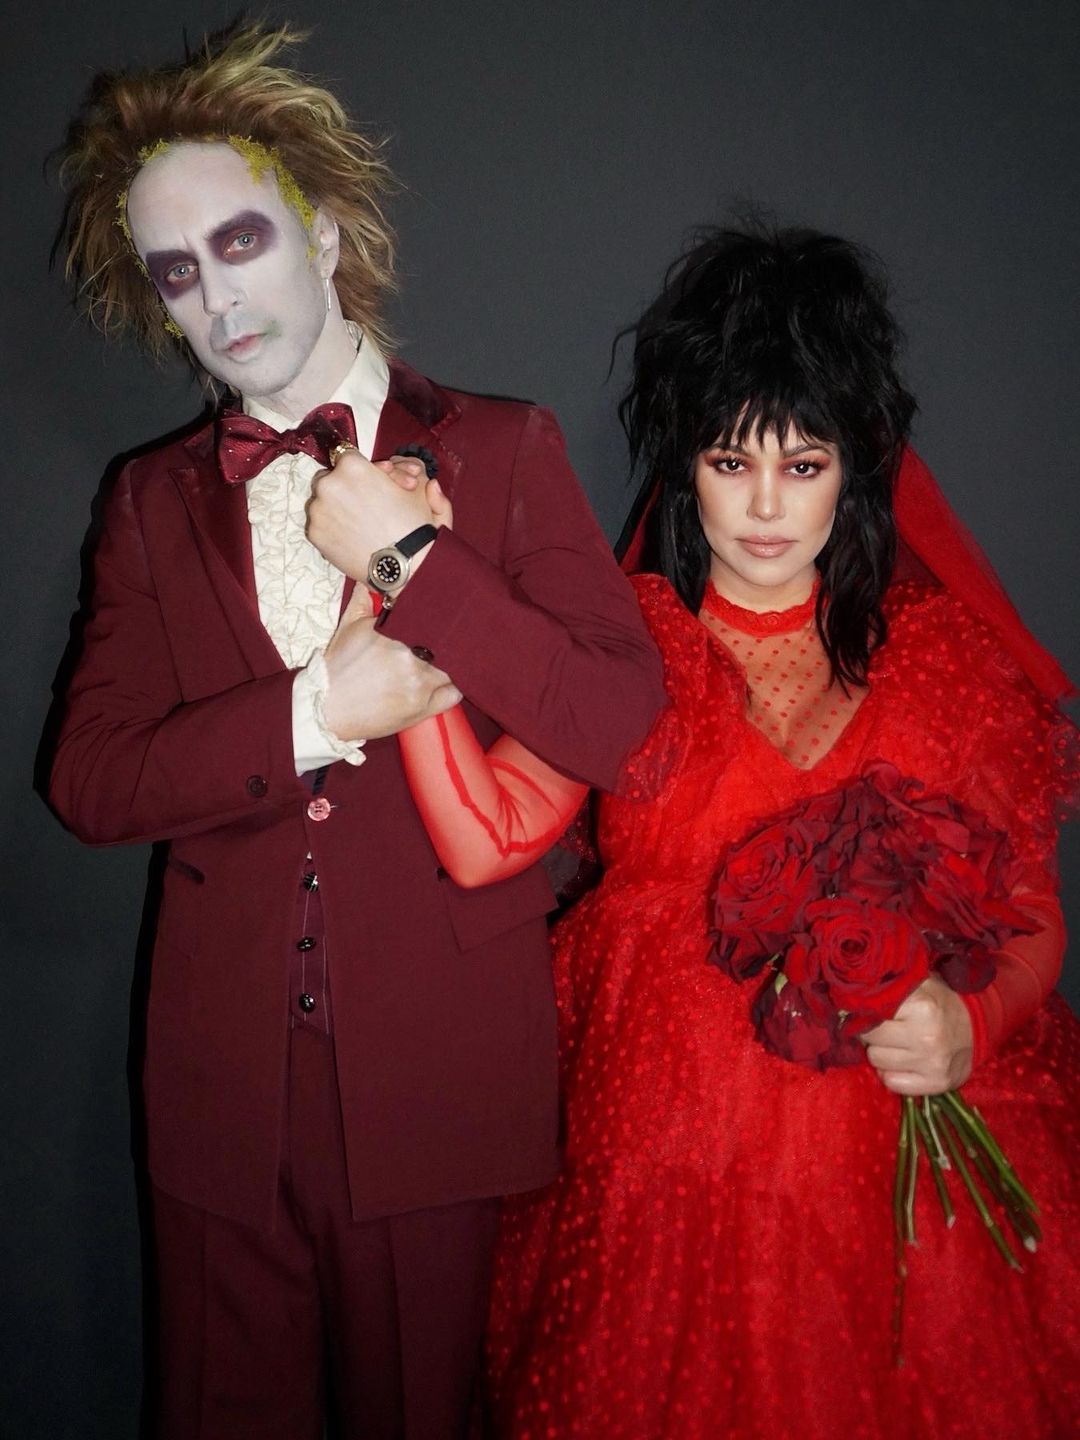 Kourtney Kardashian and Travis barker dressed as Beetlejuice and Lydia for Halloween last year